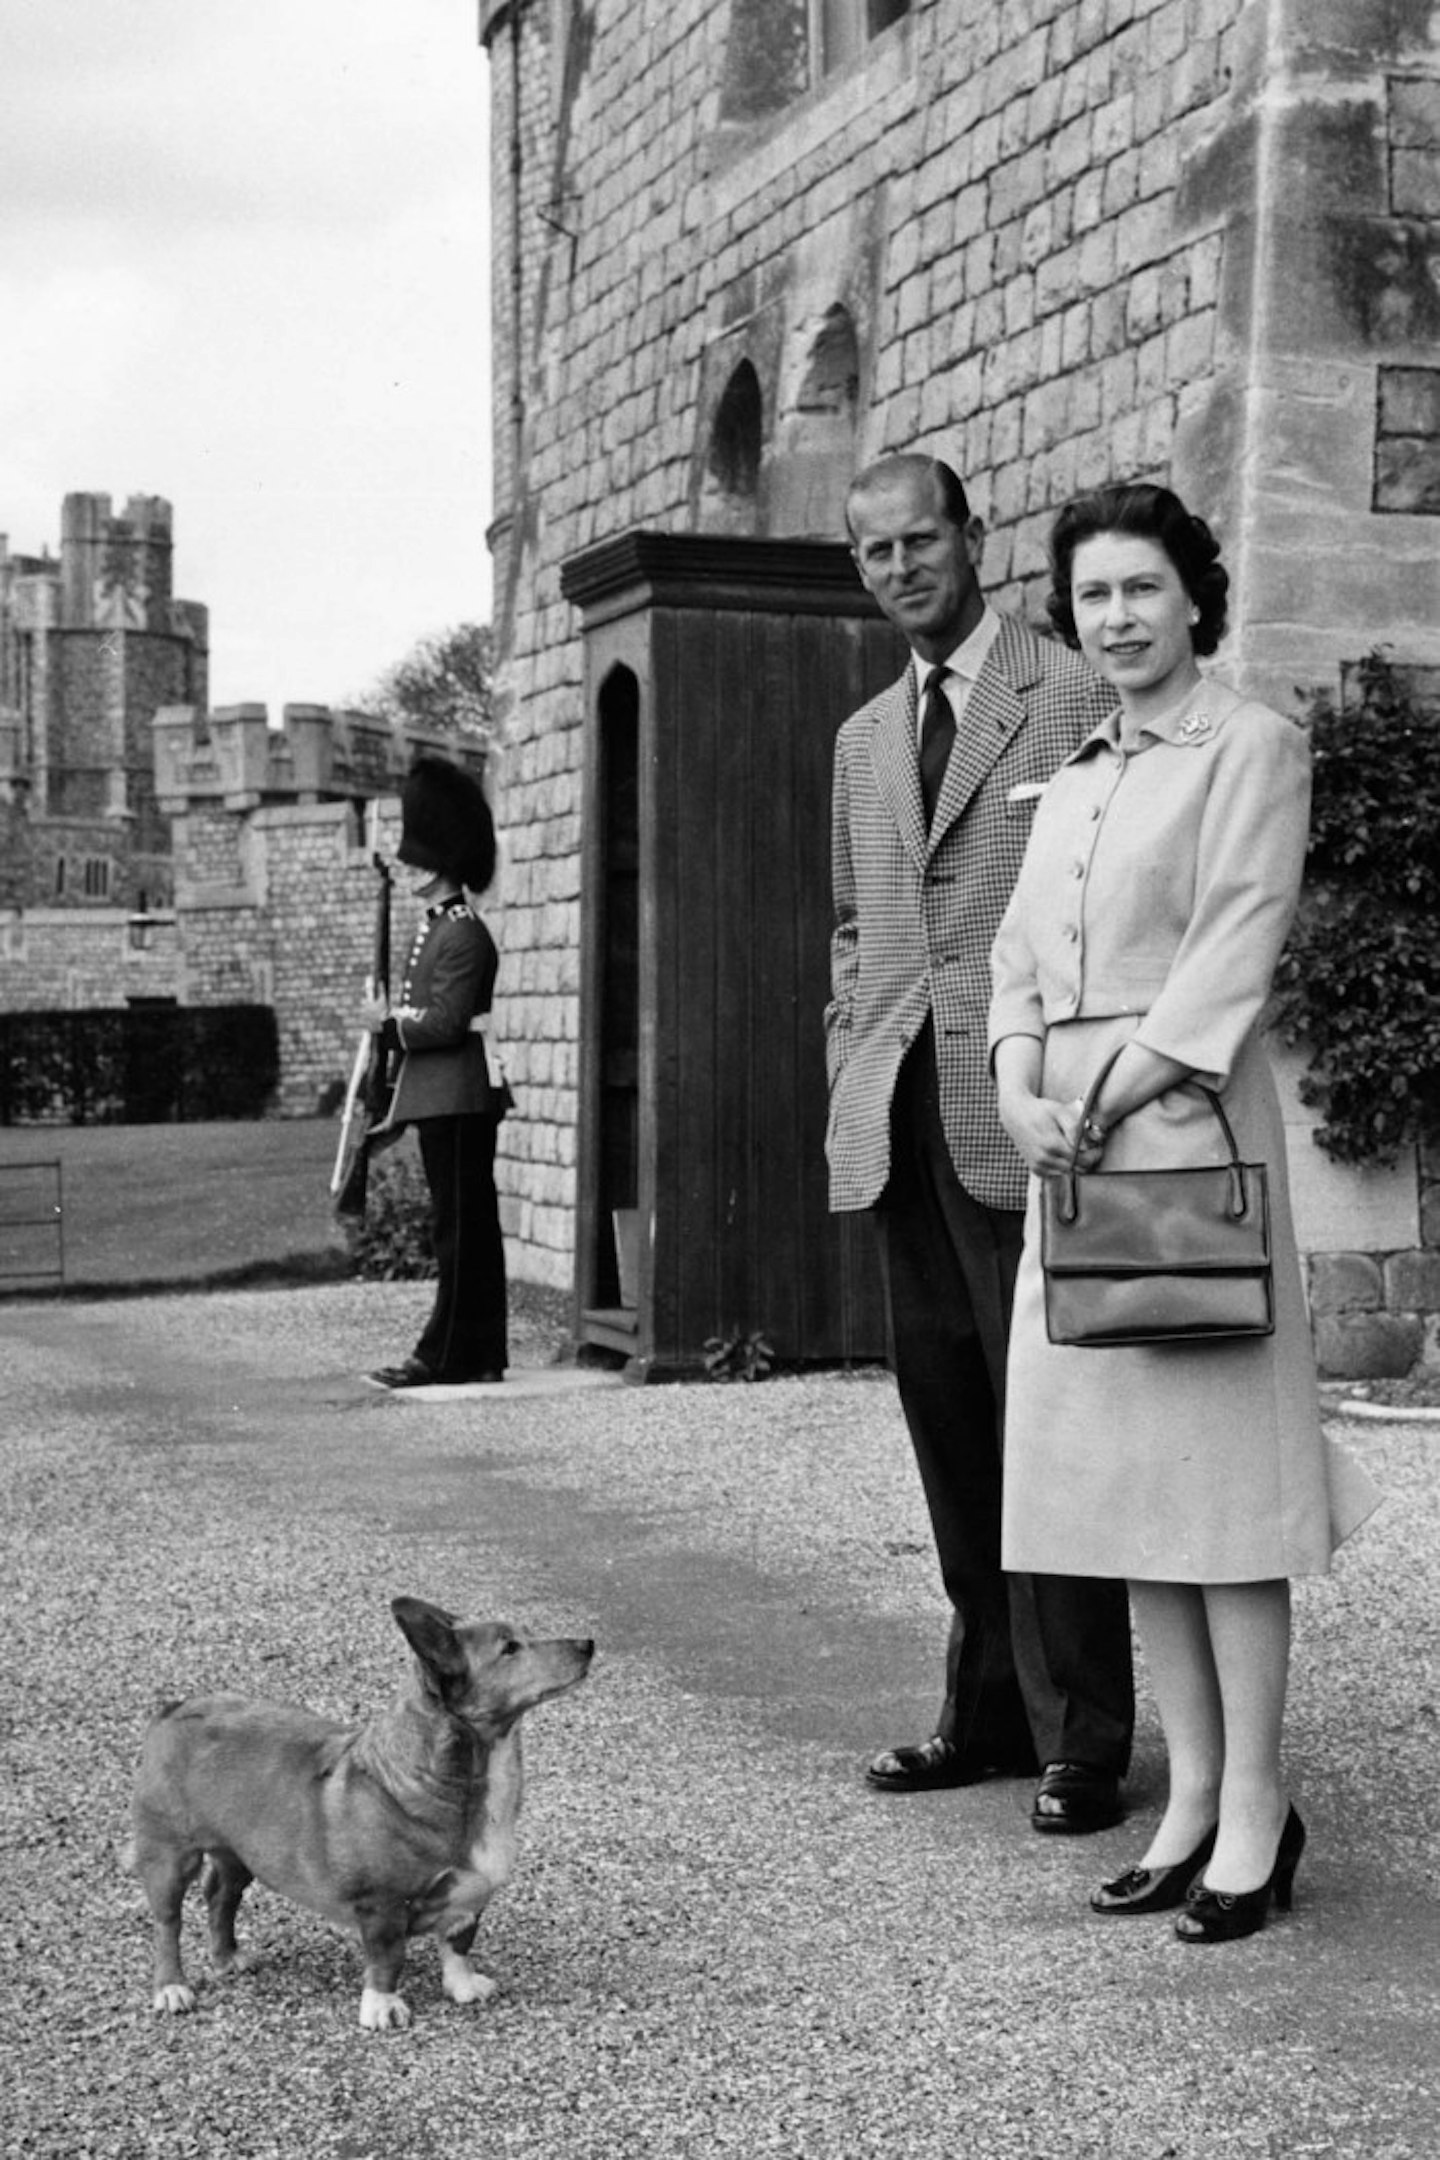 A skirt suit, accessorised with a Corgi is a real timeless look. Phillip, quit photo bombing me!